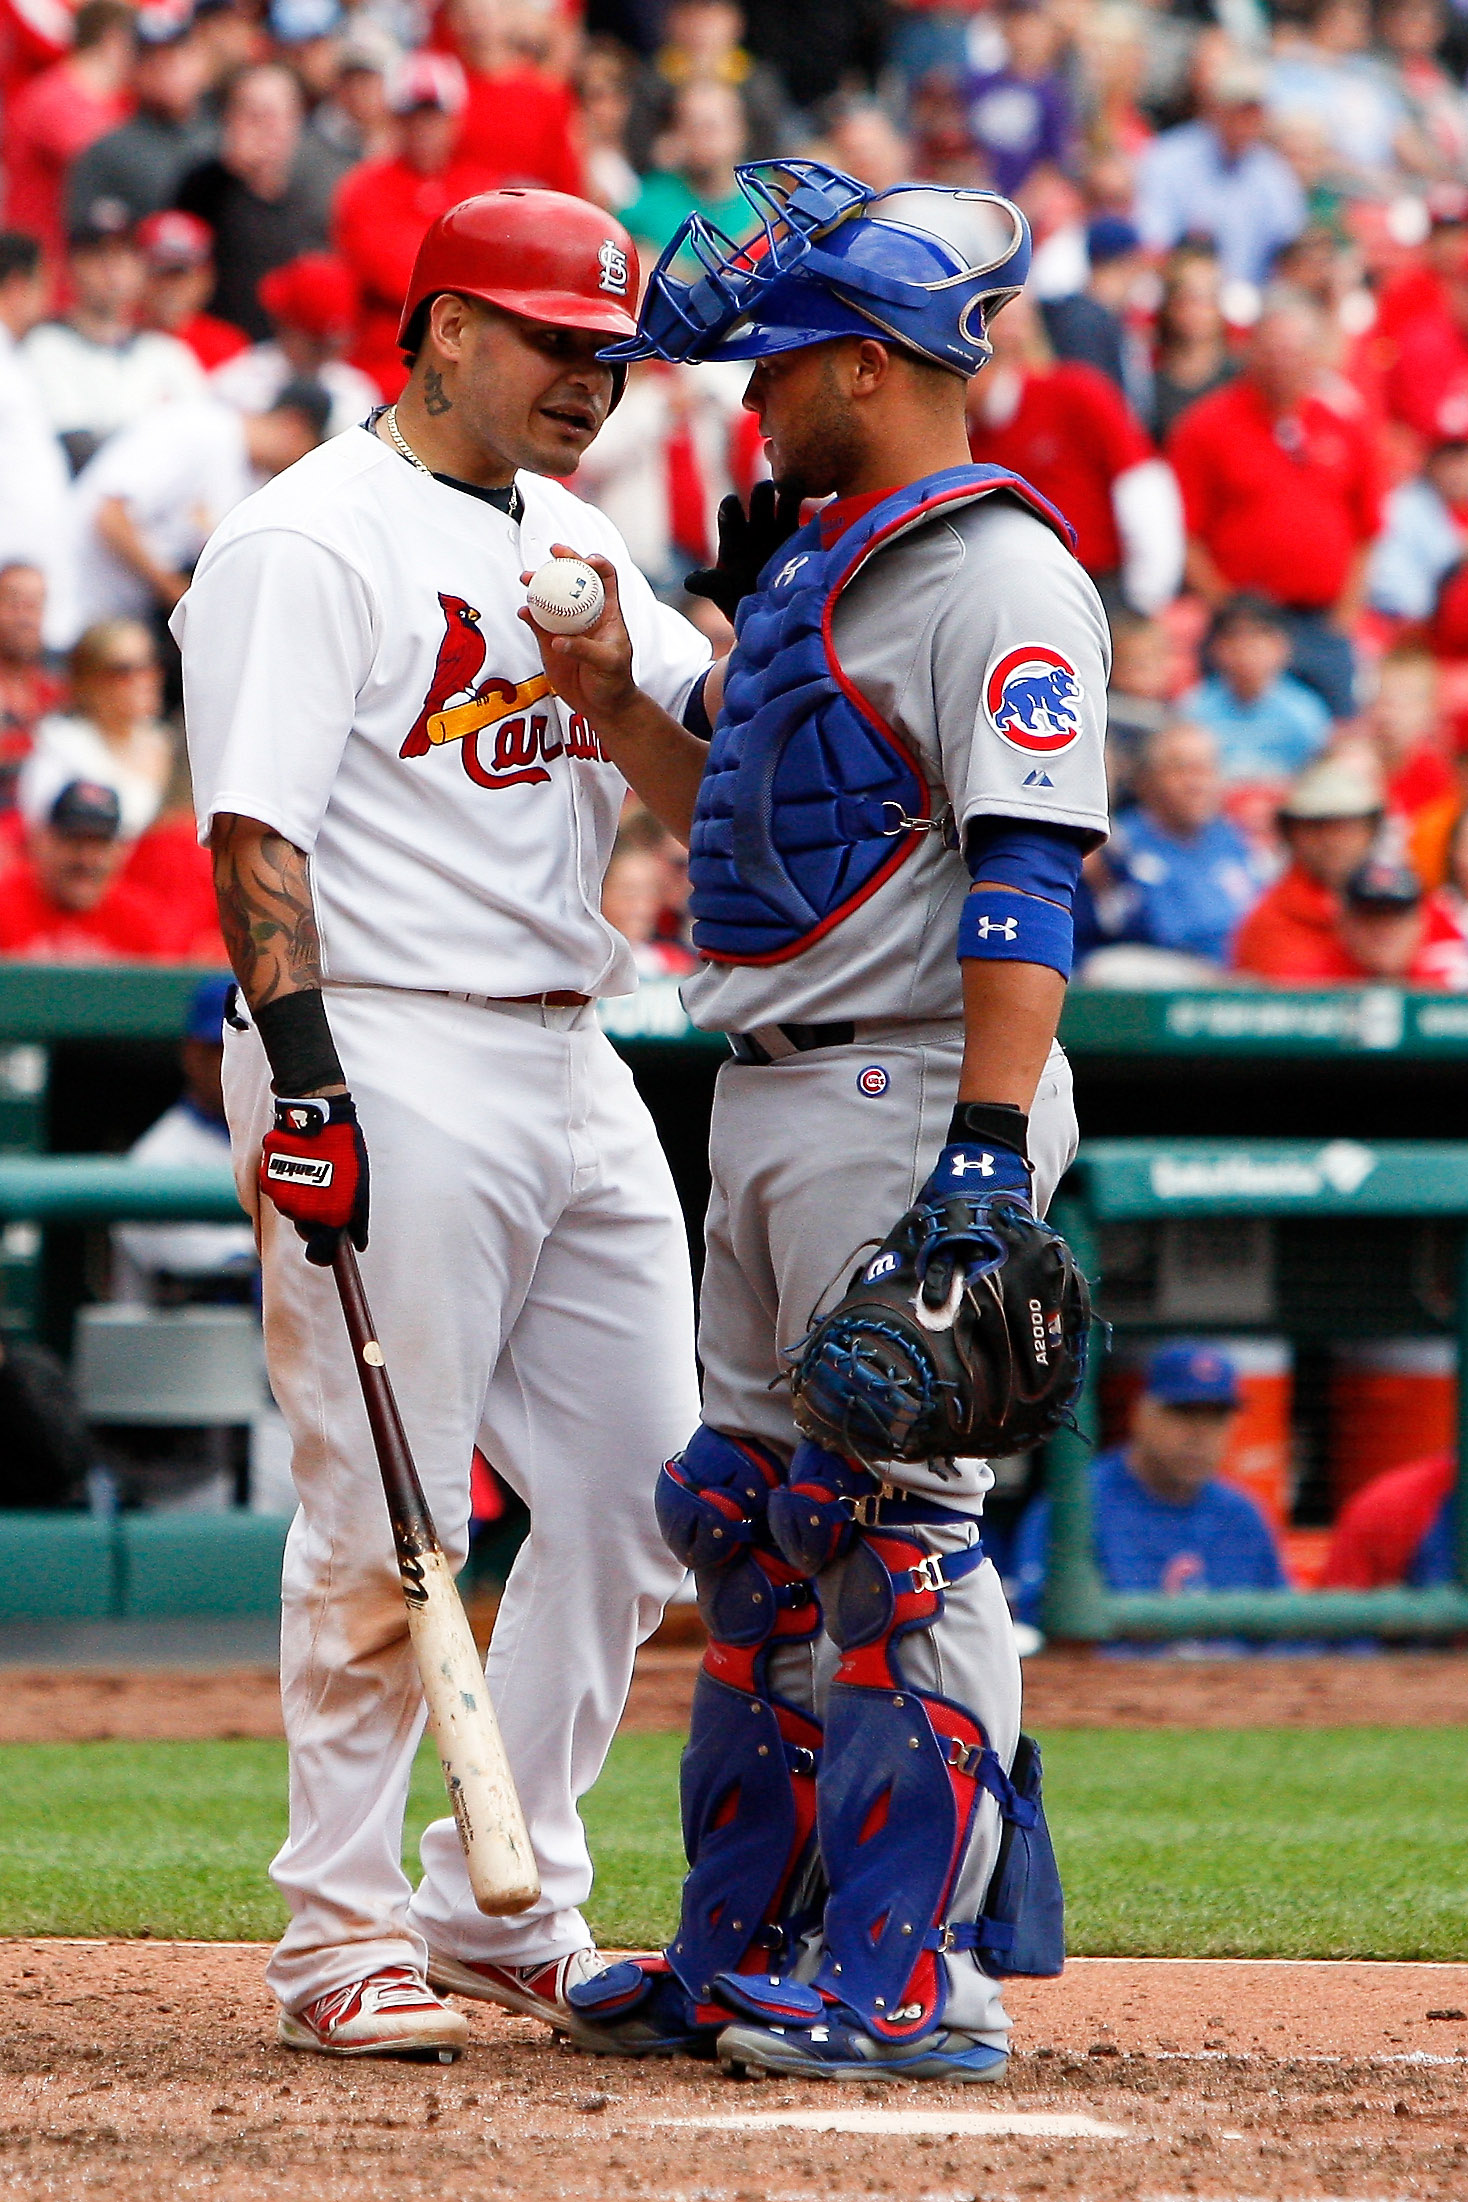 Cardinals catcher Yadier Molina is hit by a pitch in a rehab